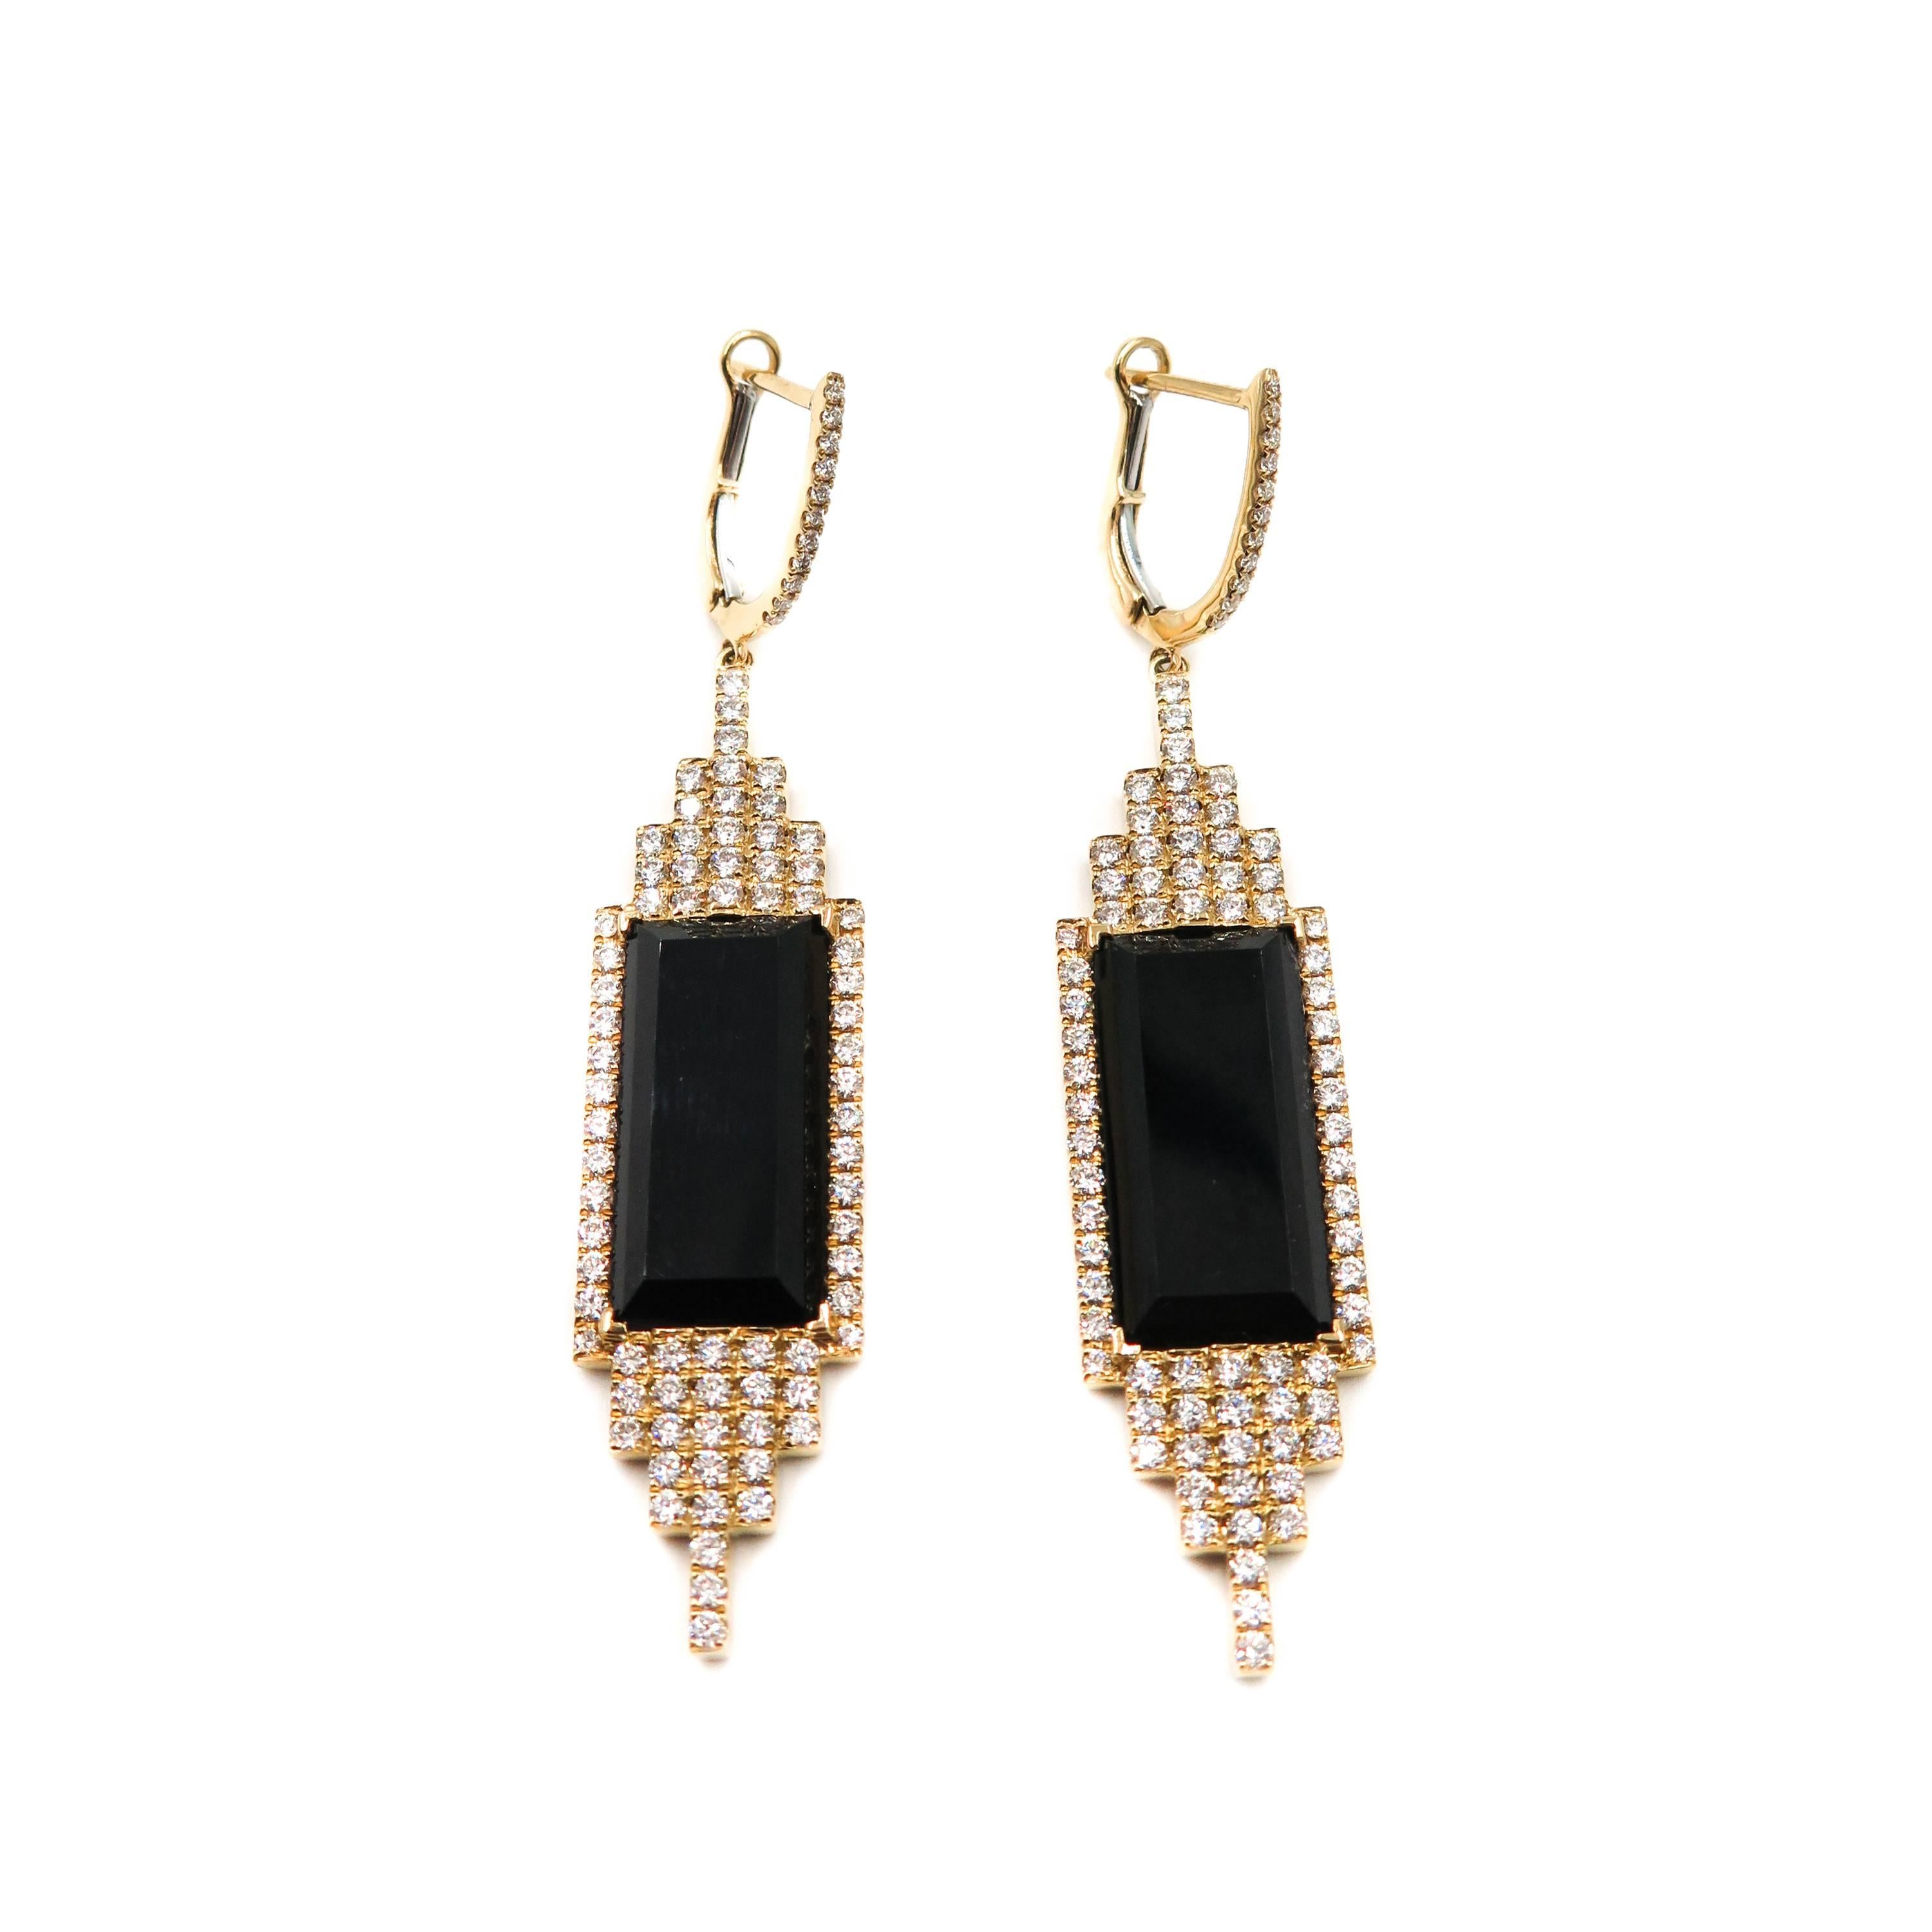 Inspired by the style and grandeur of the roaring twenties. Black Onyx and Diamonds are set in geometric vintage settings with delicate pavé details. 
This gorgeous Onyx and Diamond Drop Earrings, an homage to fashion's golden era is crafted in 18k